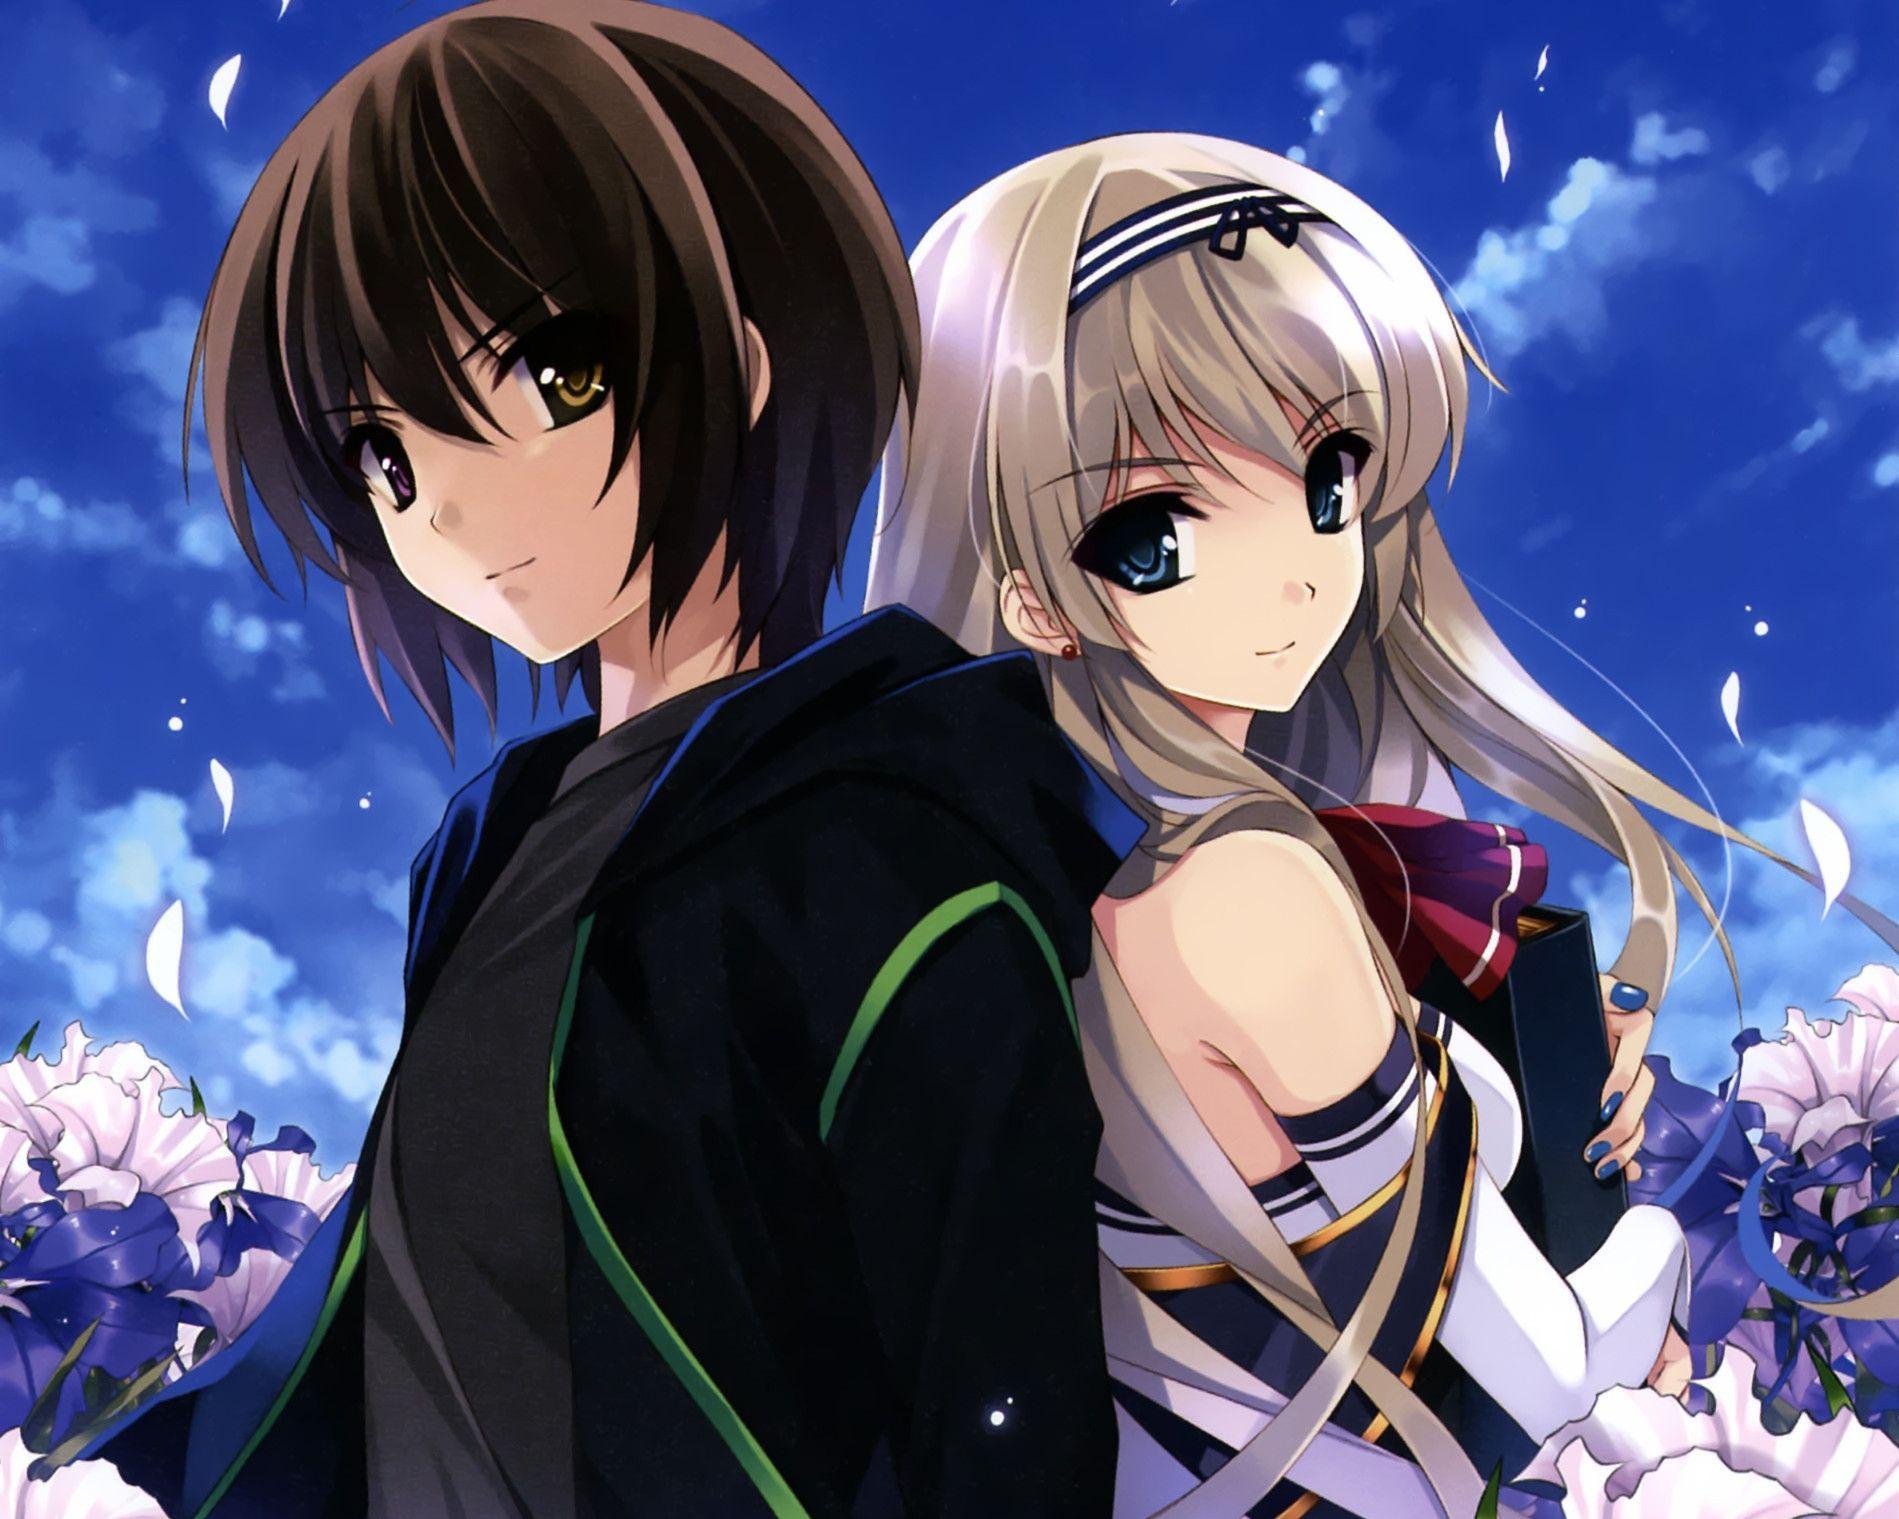 Cute Anime Couple Wallpapers